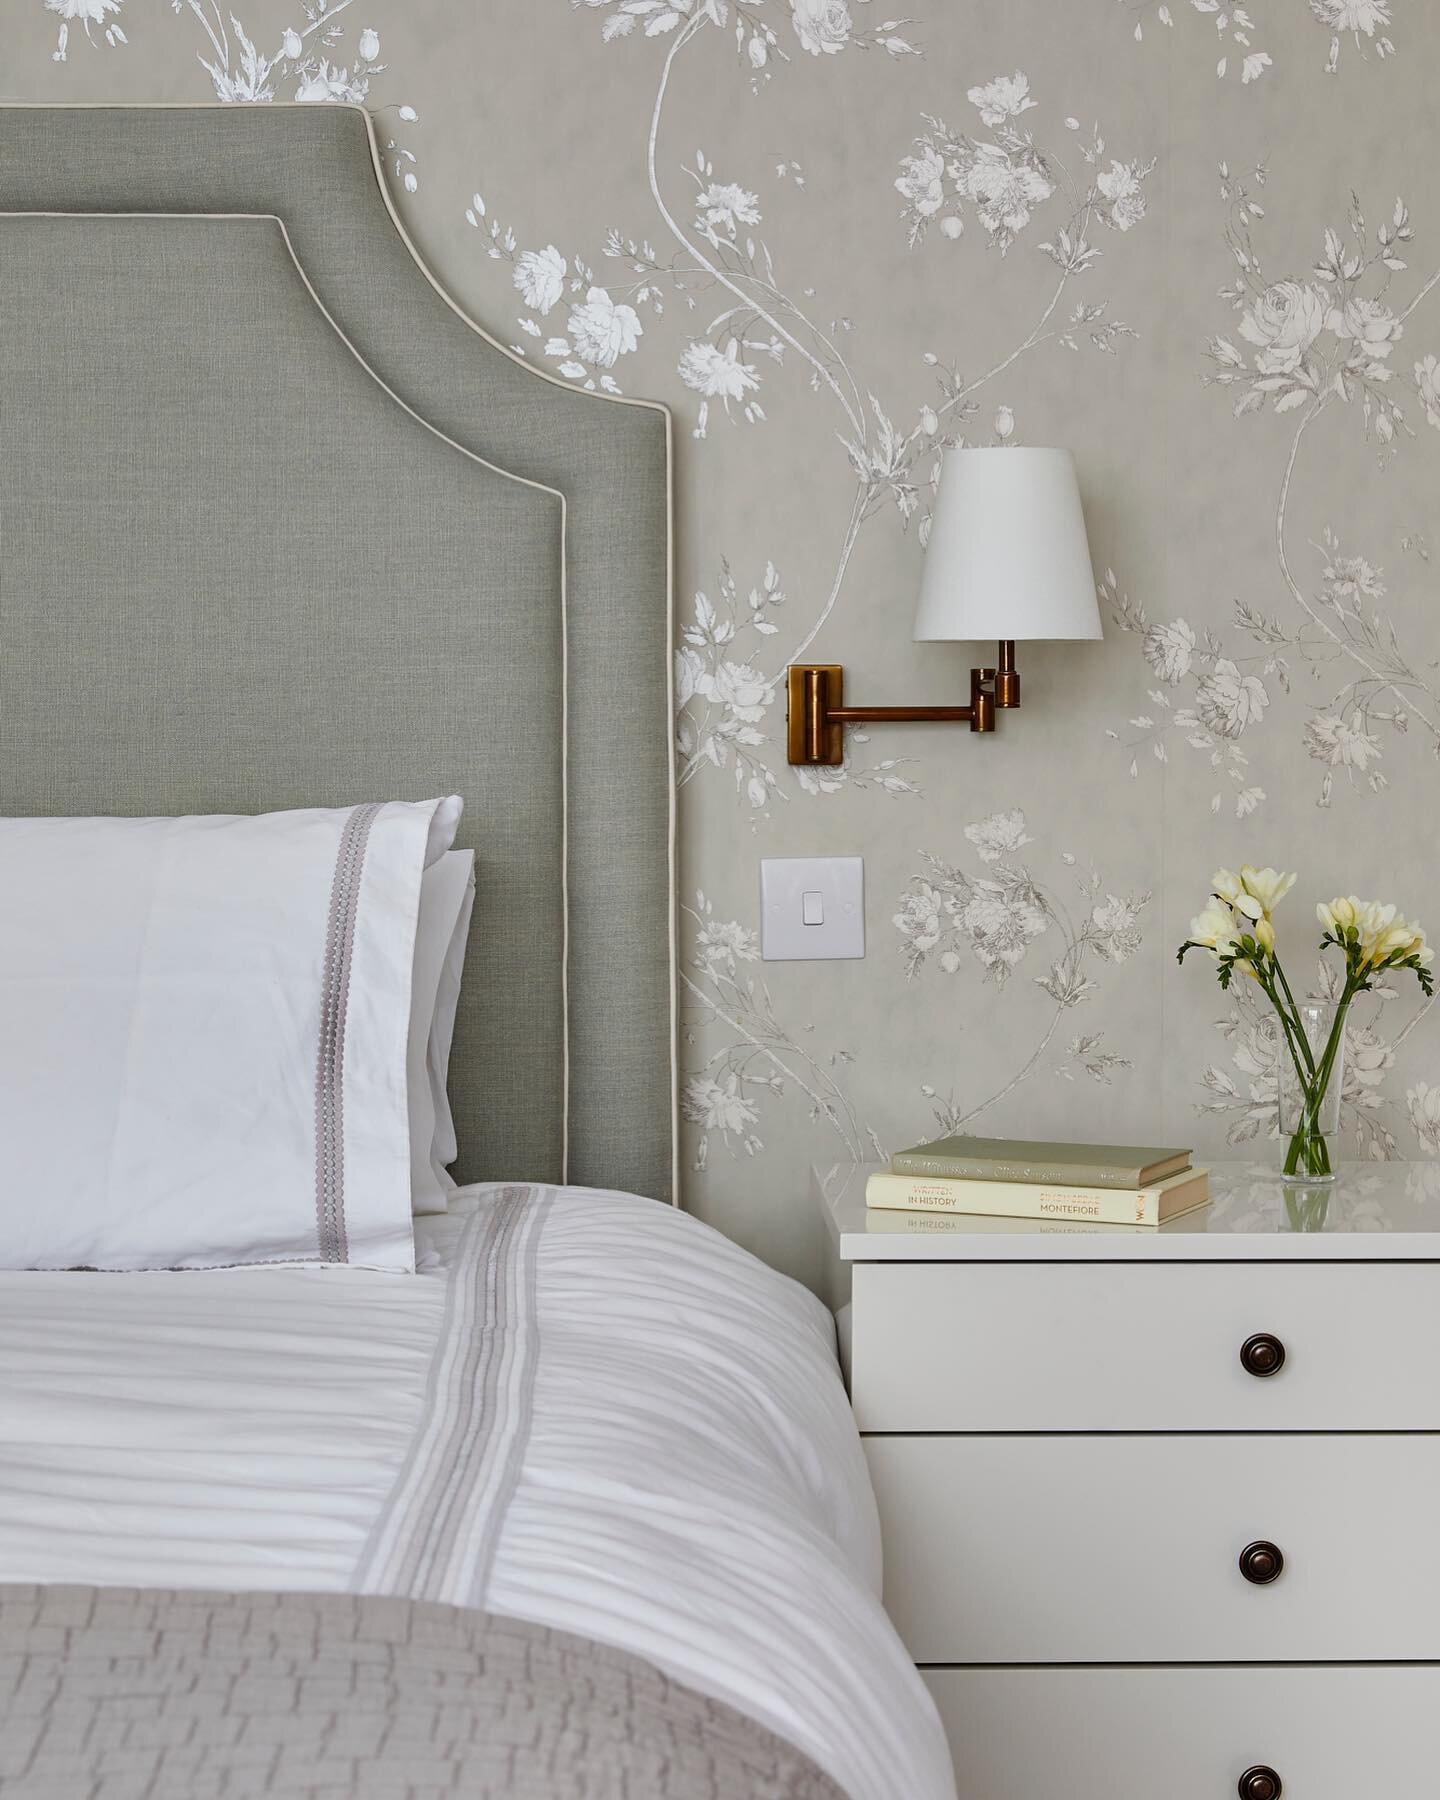 TBT this pretty bedroom we completed some years ago.  We used a floral patterned wallpaper, and kept the rest of the scheme subtle so as not to overpower the room. Successful interior design requires balance.

#londoninteriors #londoninteriordesigner